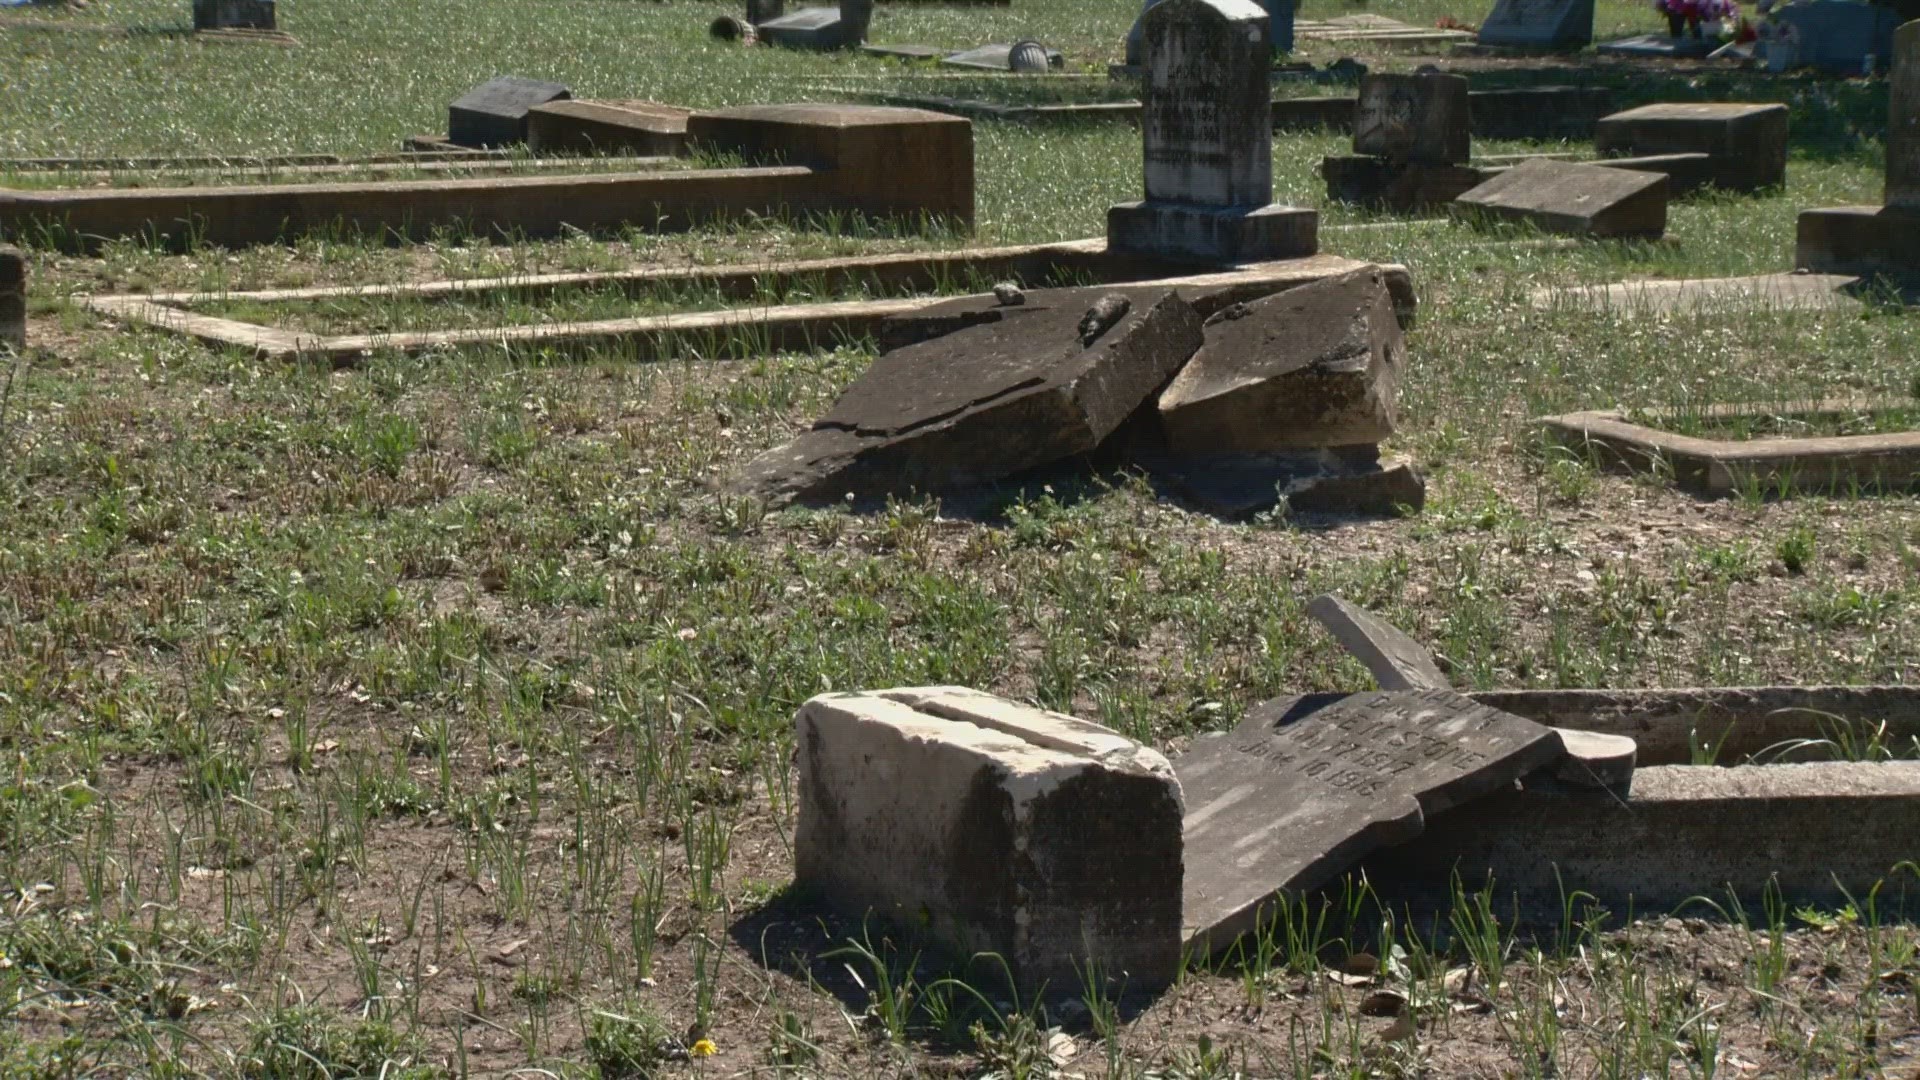 A new program is training volunteers how to use the proper products and tools to care for some of San Antonio's oldest grave sites.